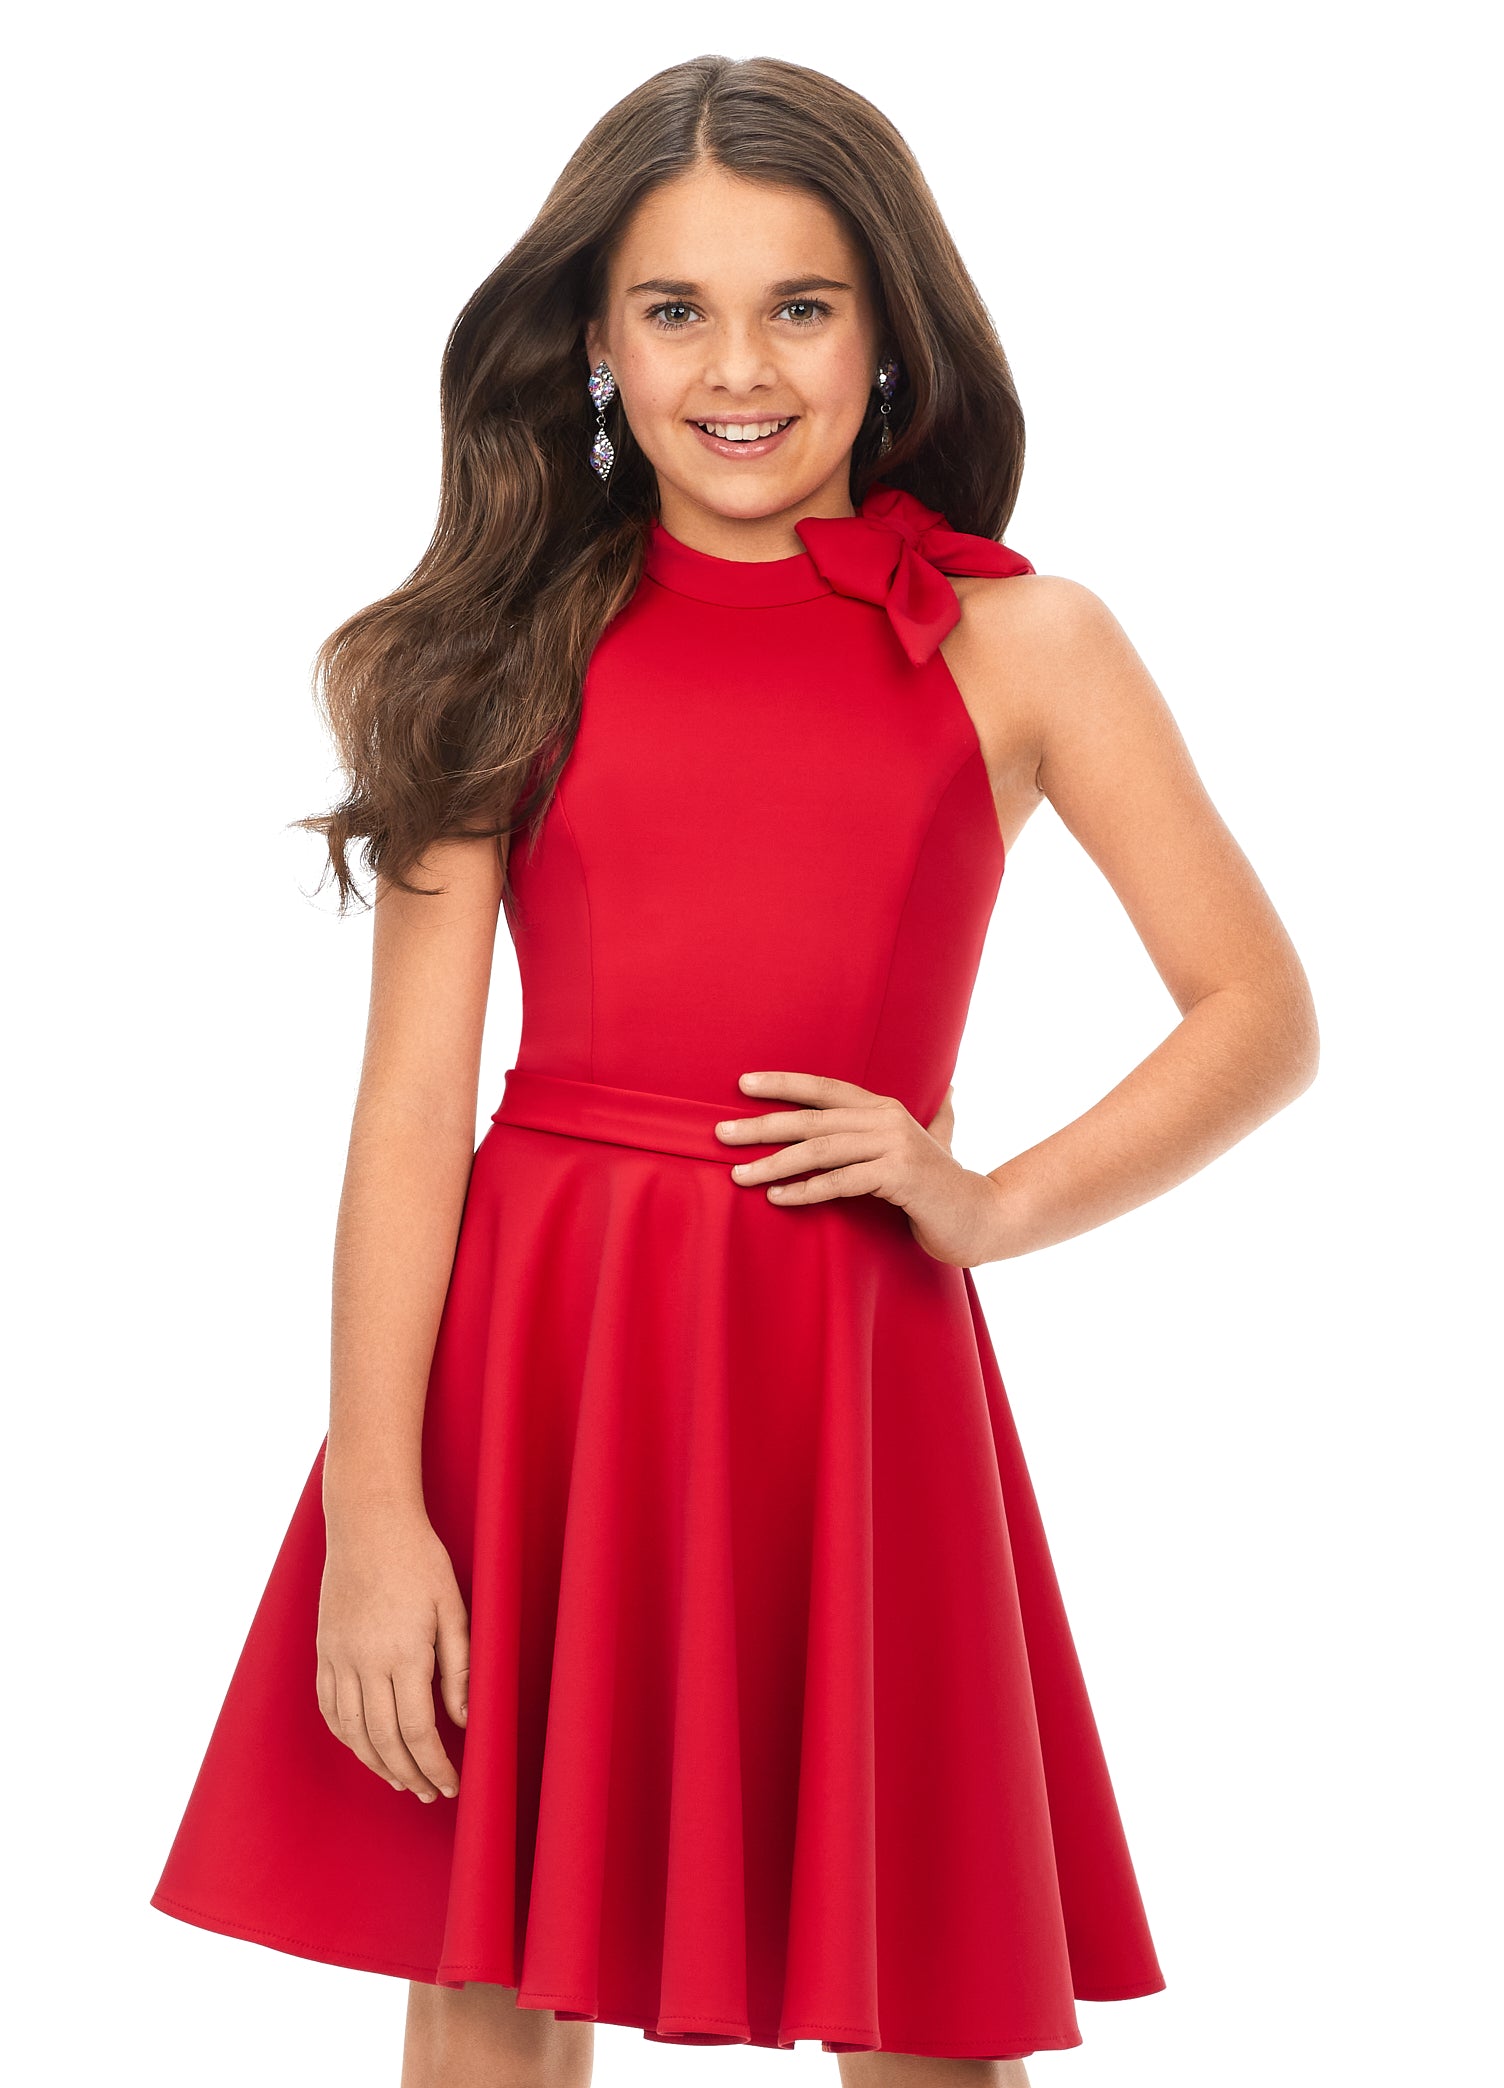 Ashley Lauren Kids 8167 Girls Red Scuba Cocktail Dress with Bow